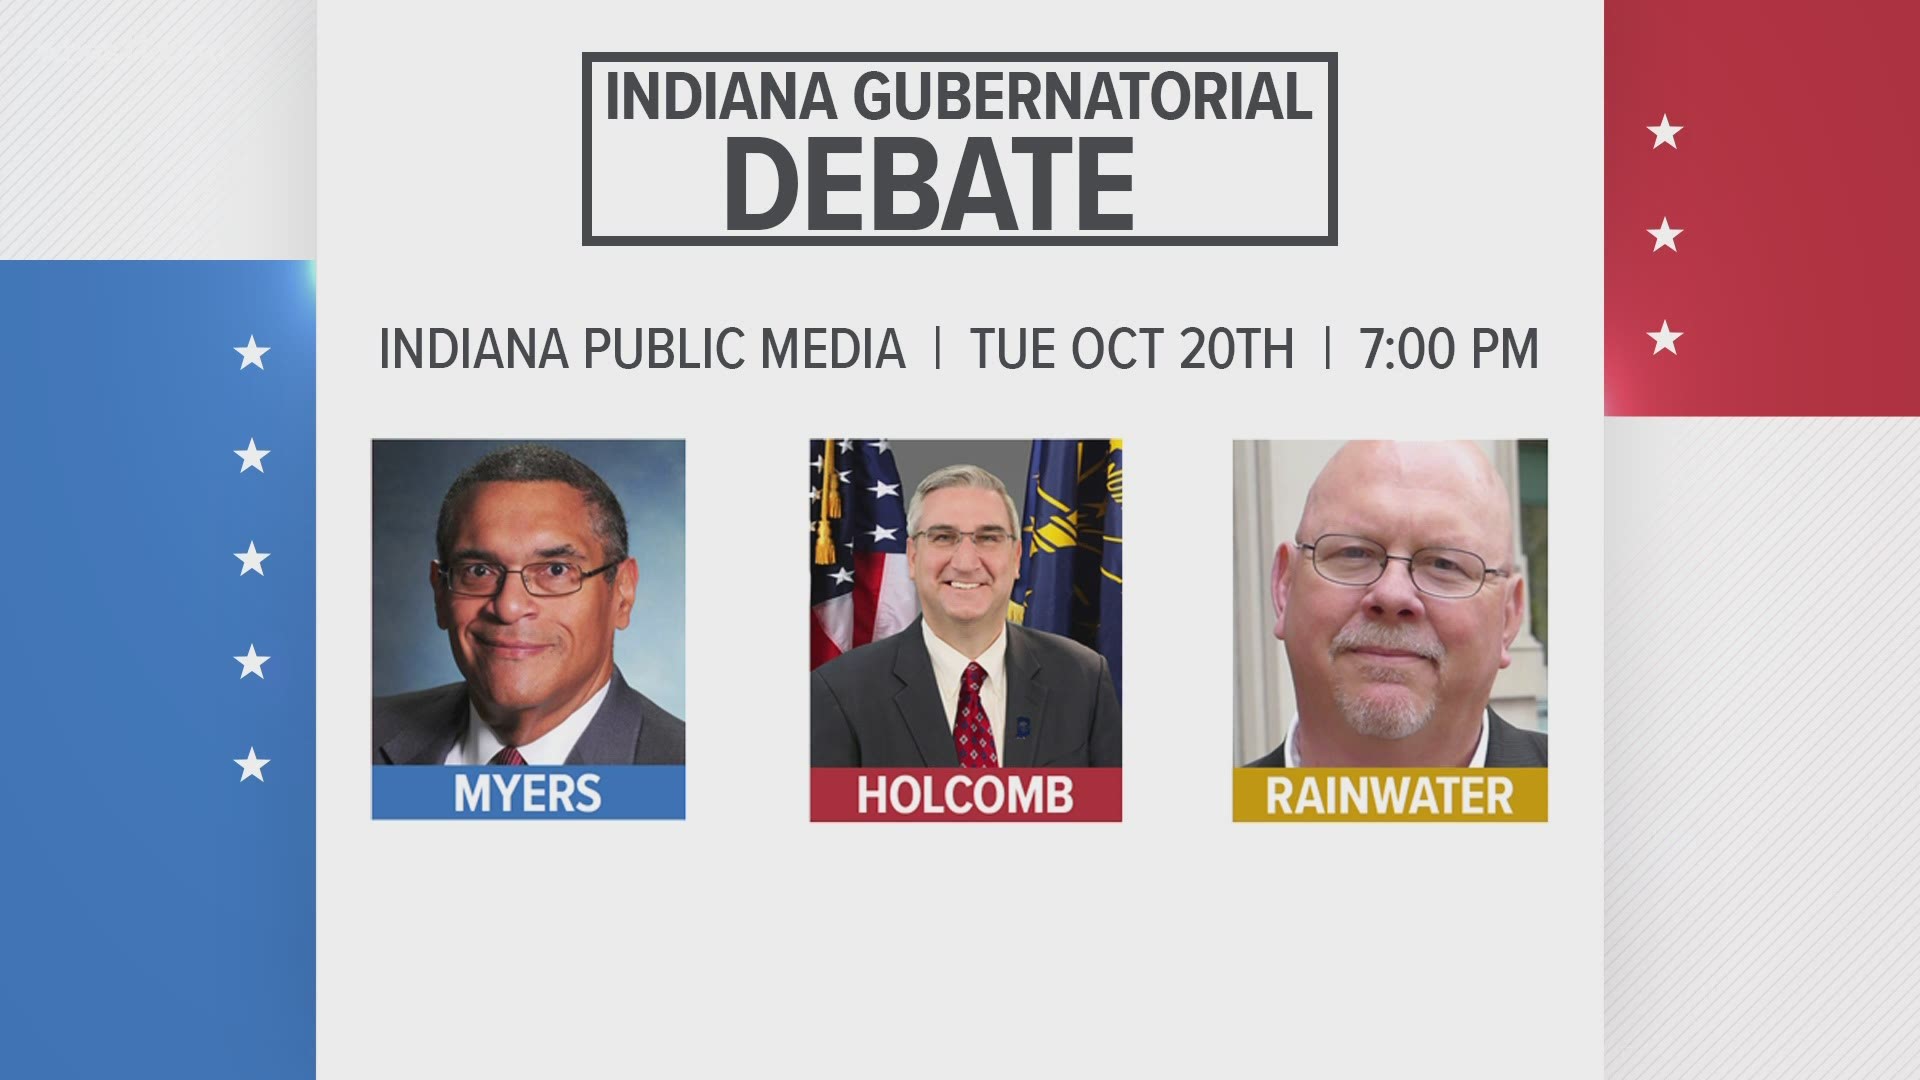 Ahead of the Indiana gubernatorial debate on Oct. 20, WHAS11's Rob Harris gives a breakdown on the candidates running.